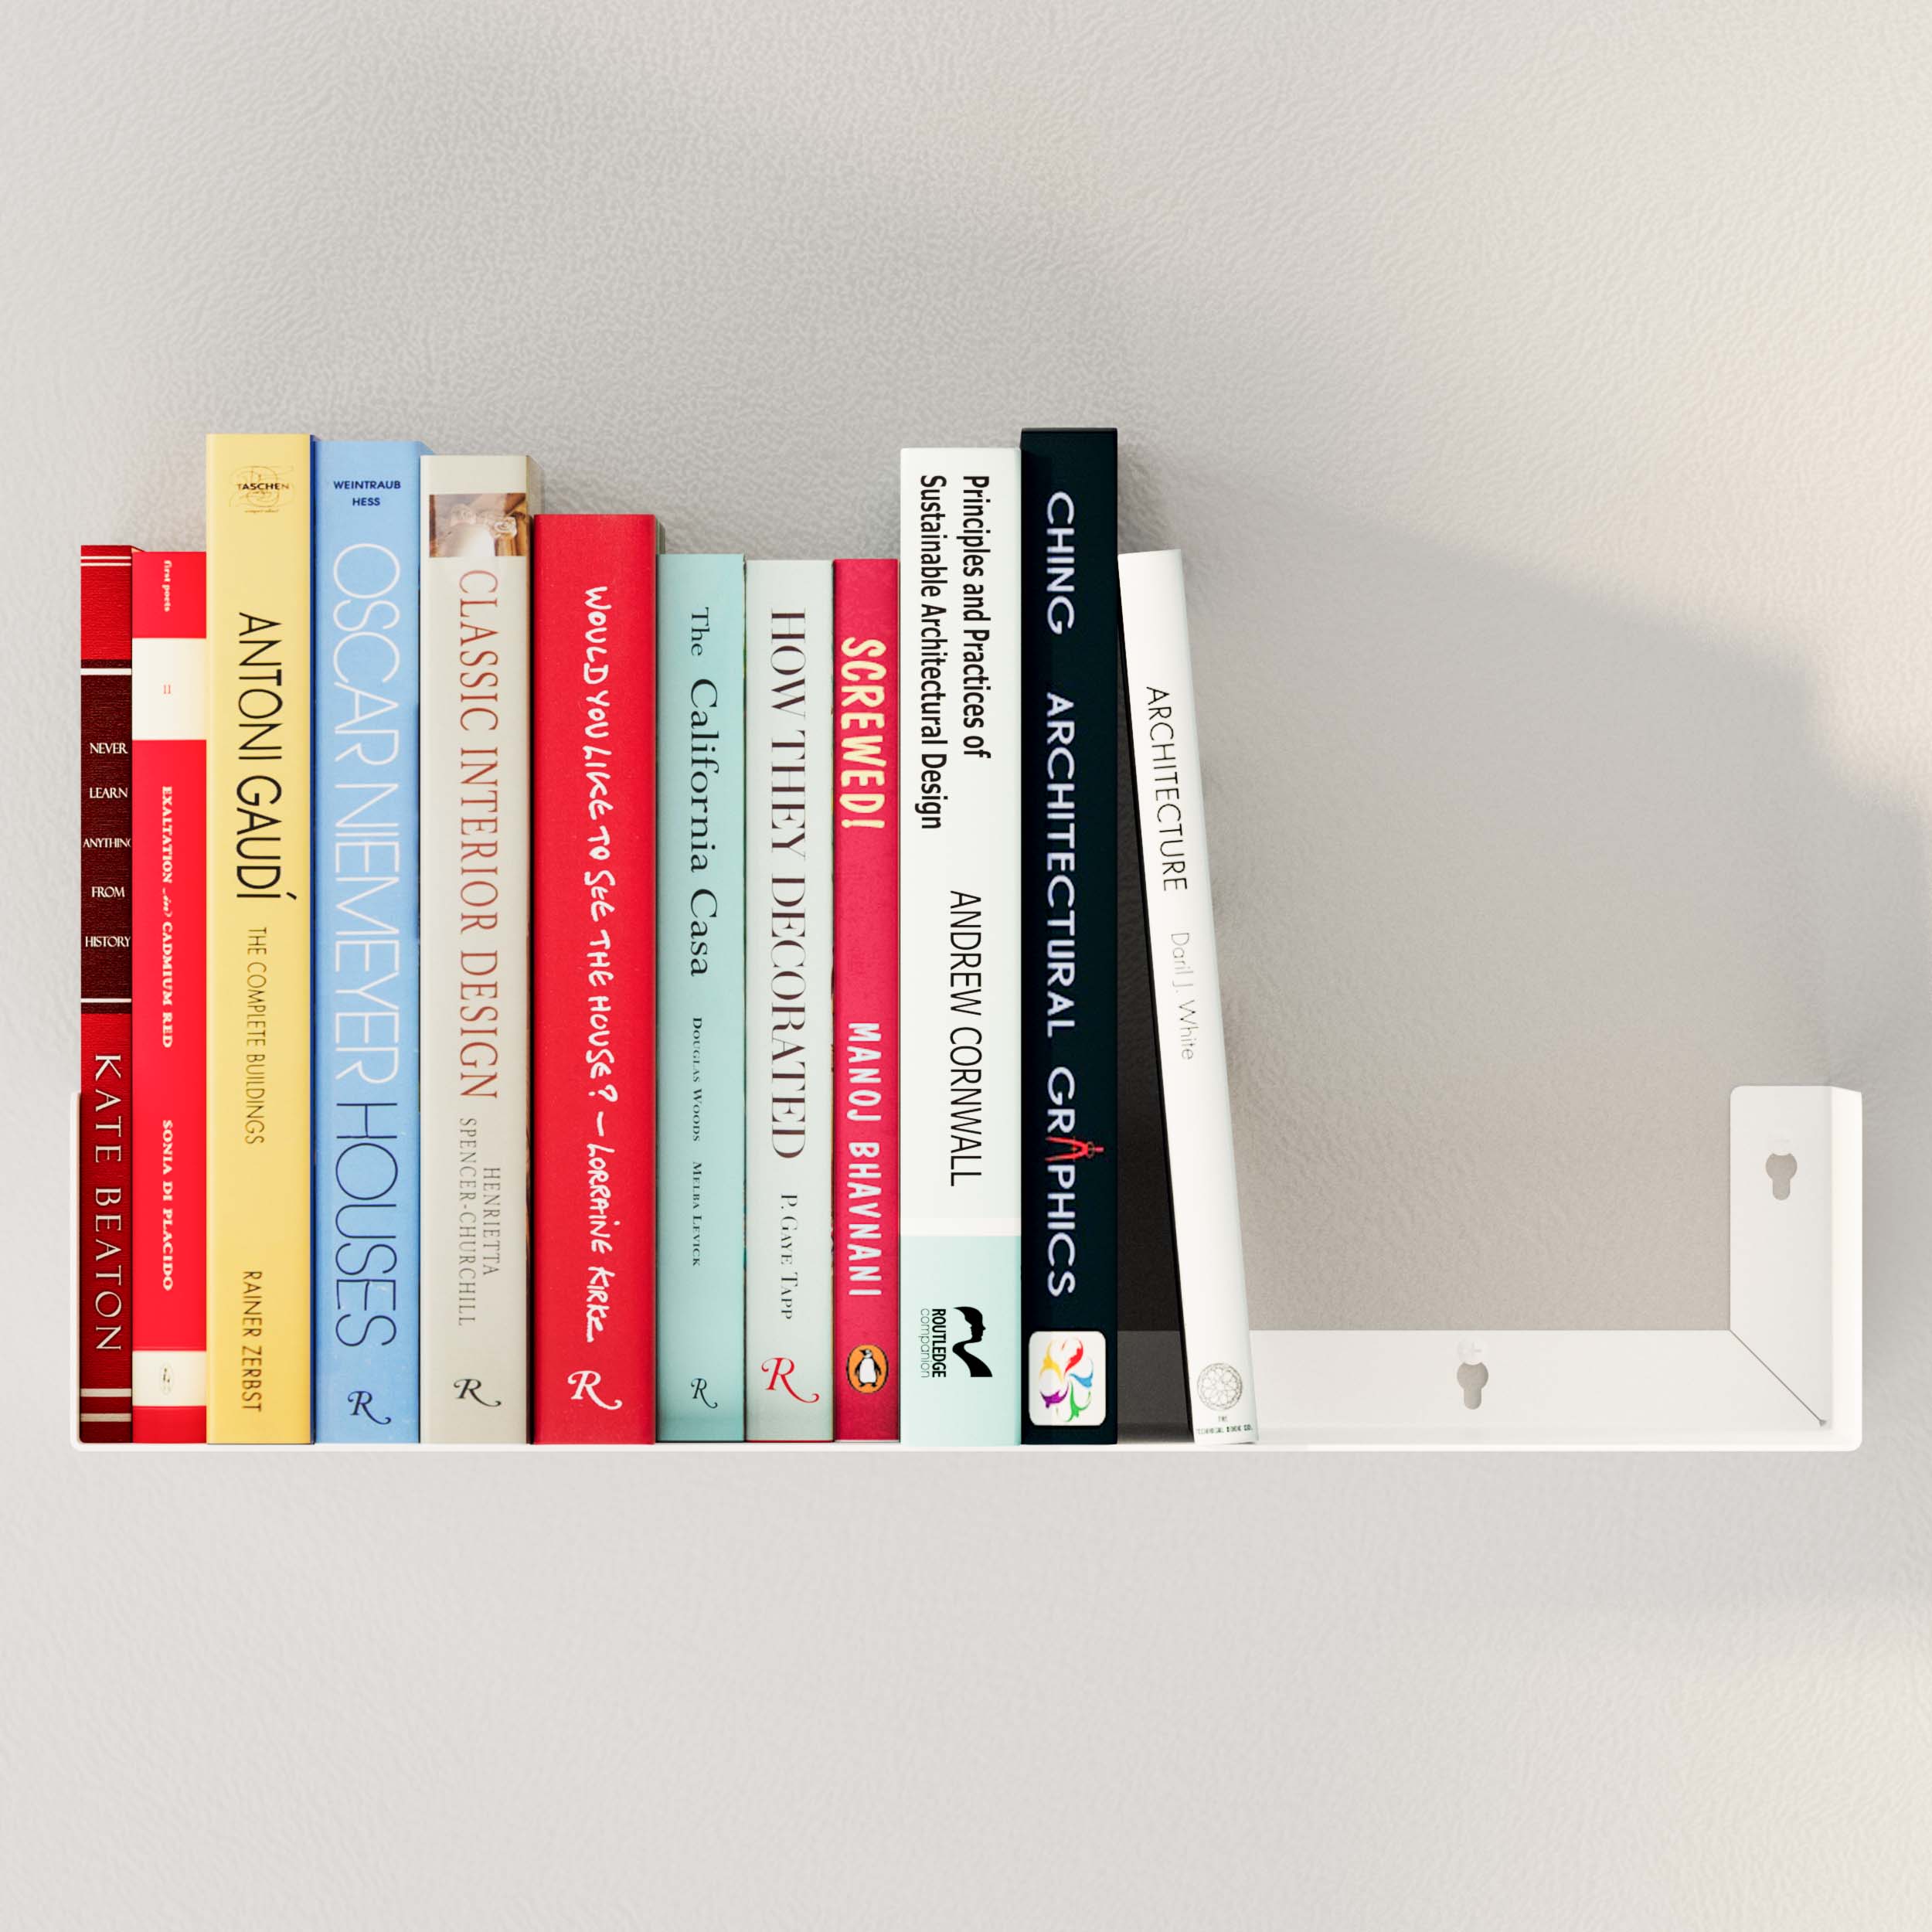 Showcase your colorful book collection stylishly with this white metal U-shaped bookshelf. Durable and chic, it fits perfectly in any home decor. 